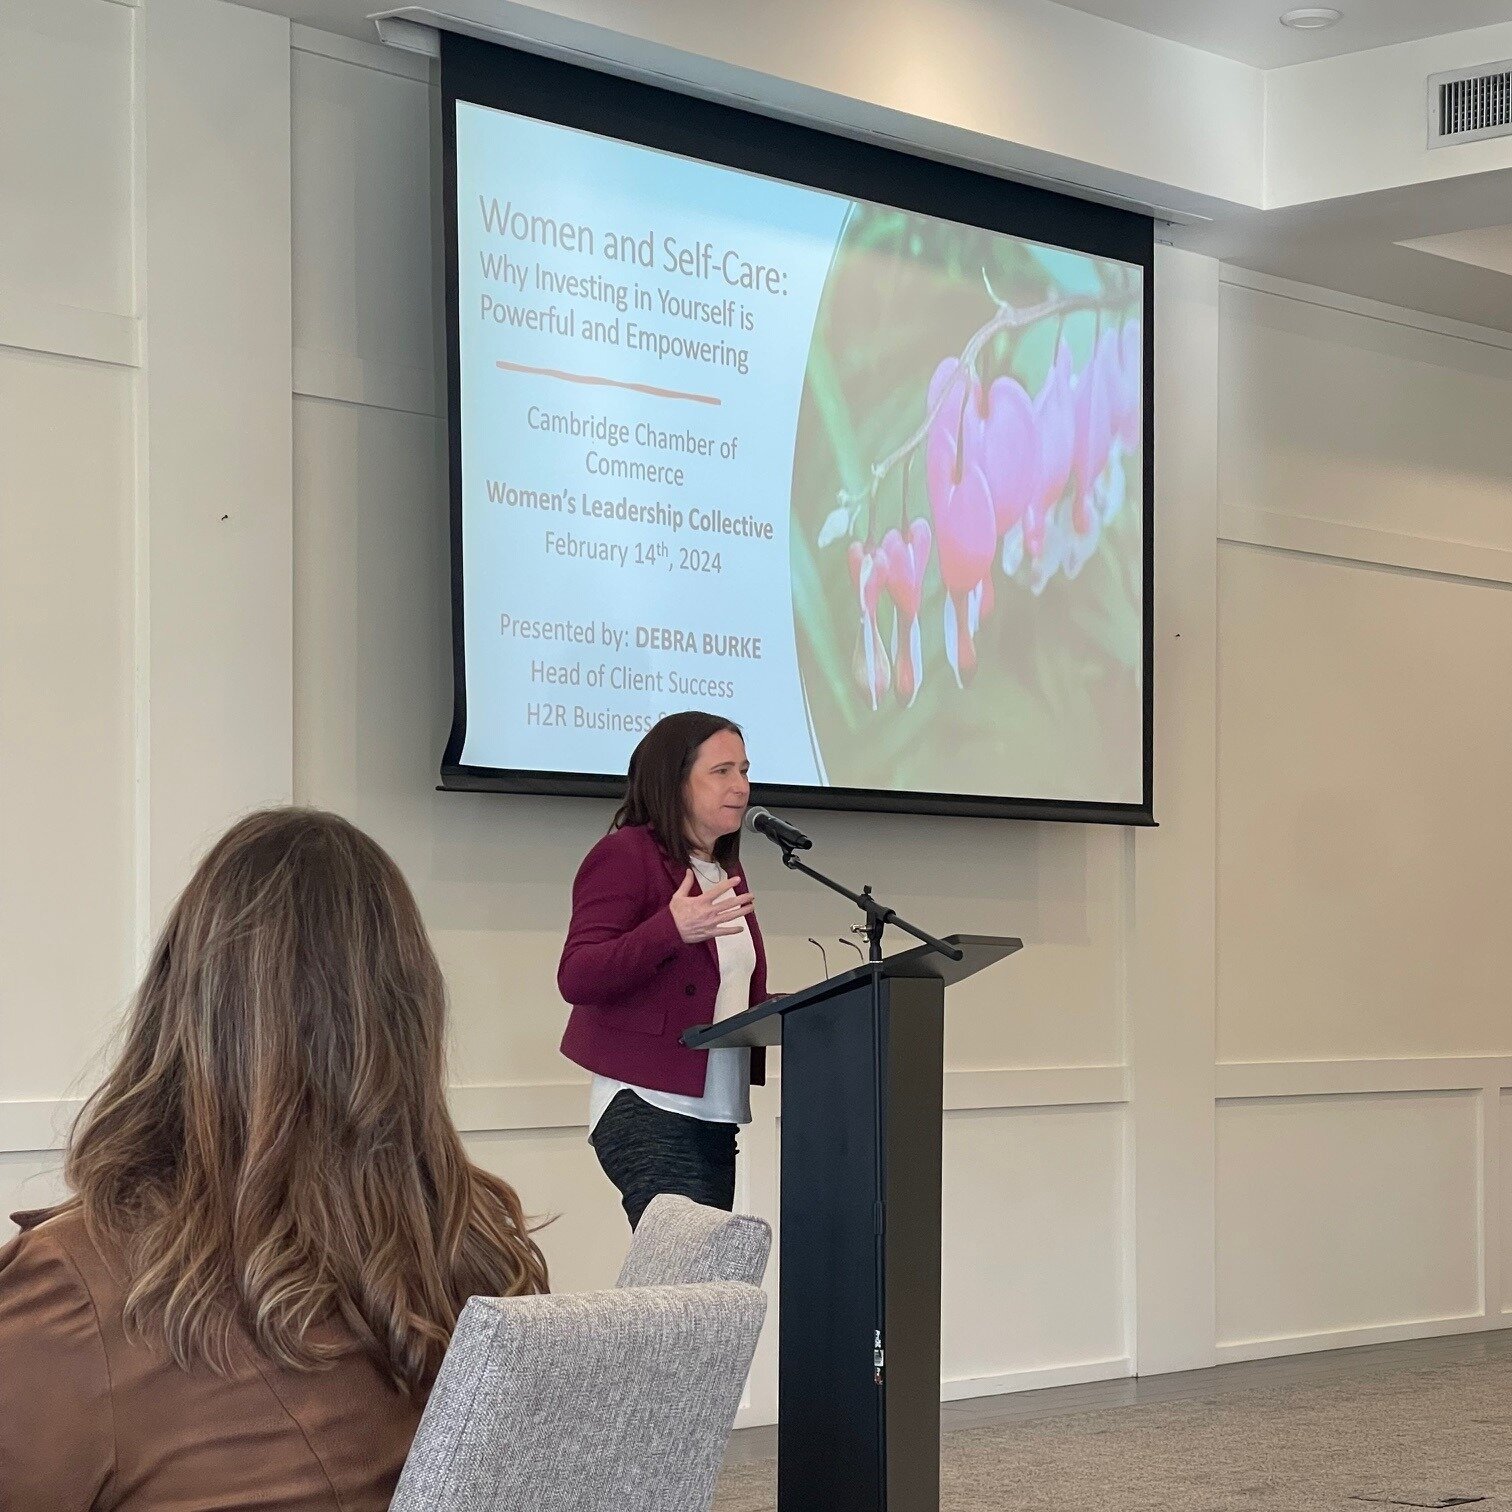 Yesterday some of our #amazing Jackman women got to attend a talk hosted by the @grand_valley_construction_asso and at @langdonhall.
-
The talk was lead by the spectacular Debra Burke from @h2rbusinesssolutions, focused on #empoweringwomen through en